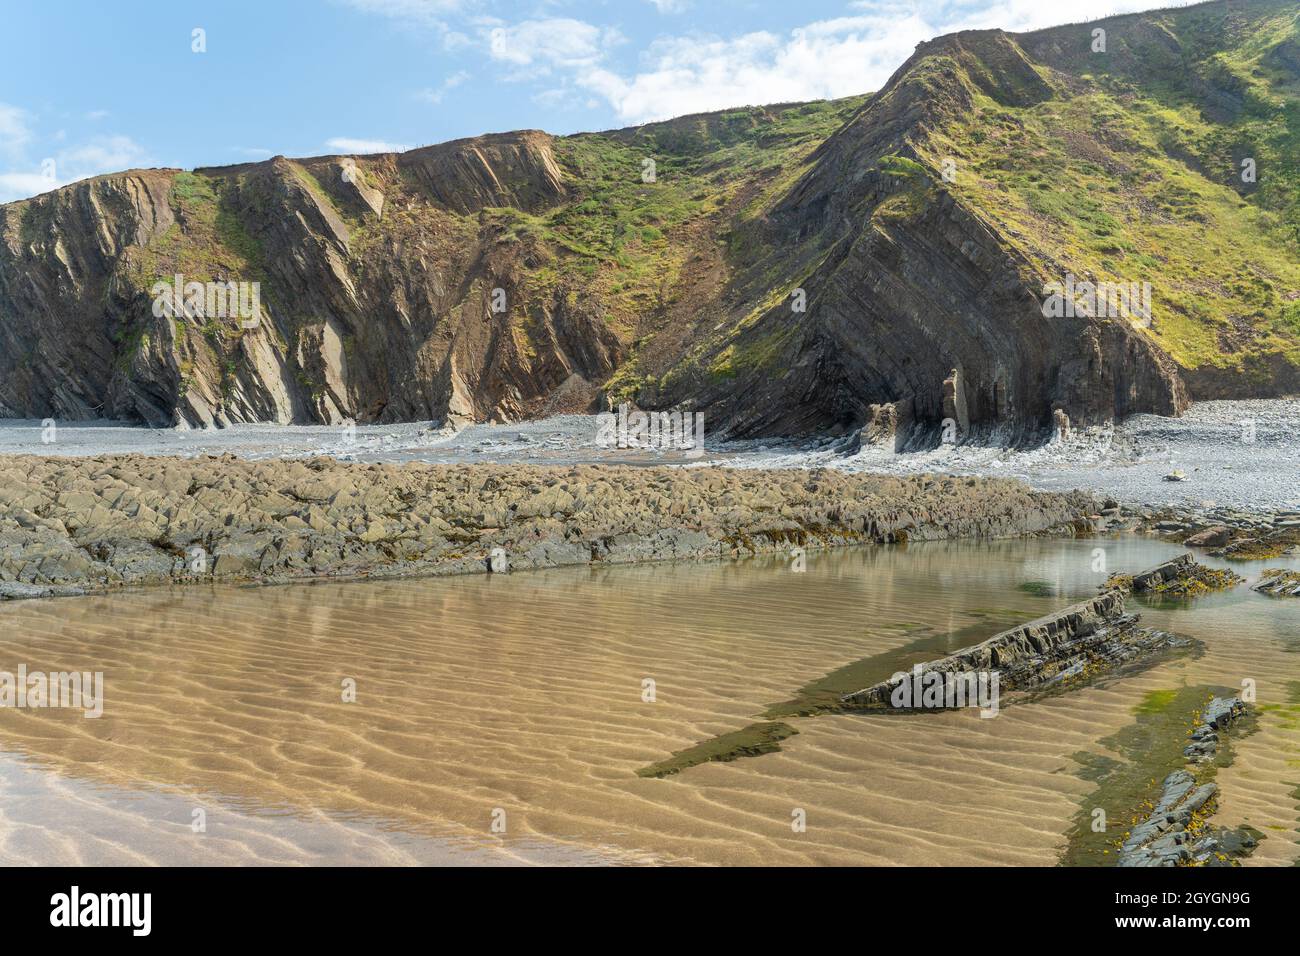 Speke's Mill Mouth near Hartland Quay on the north Devon coast at low tide looking up at the geologically interesting rocks and cliffs Stock Photo